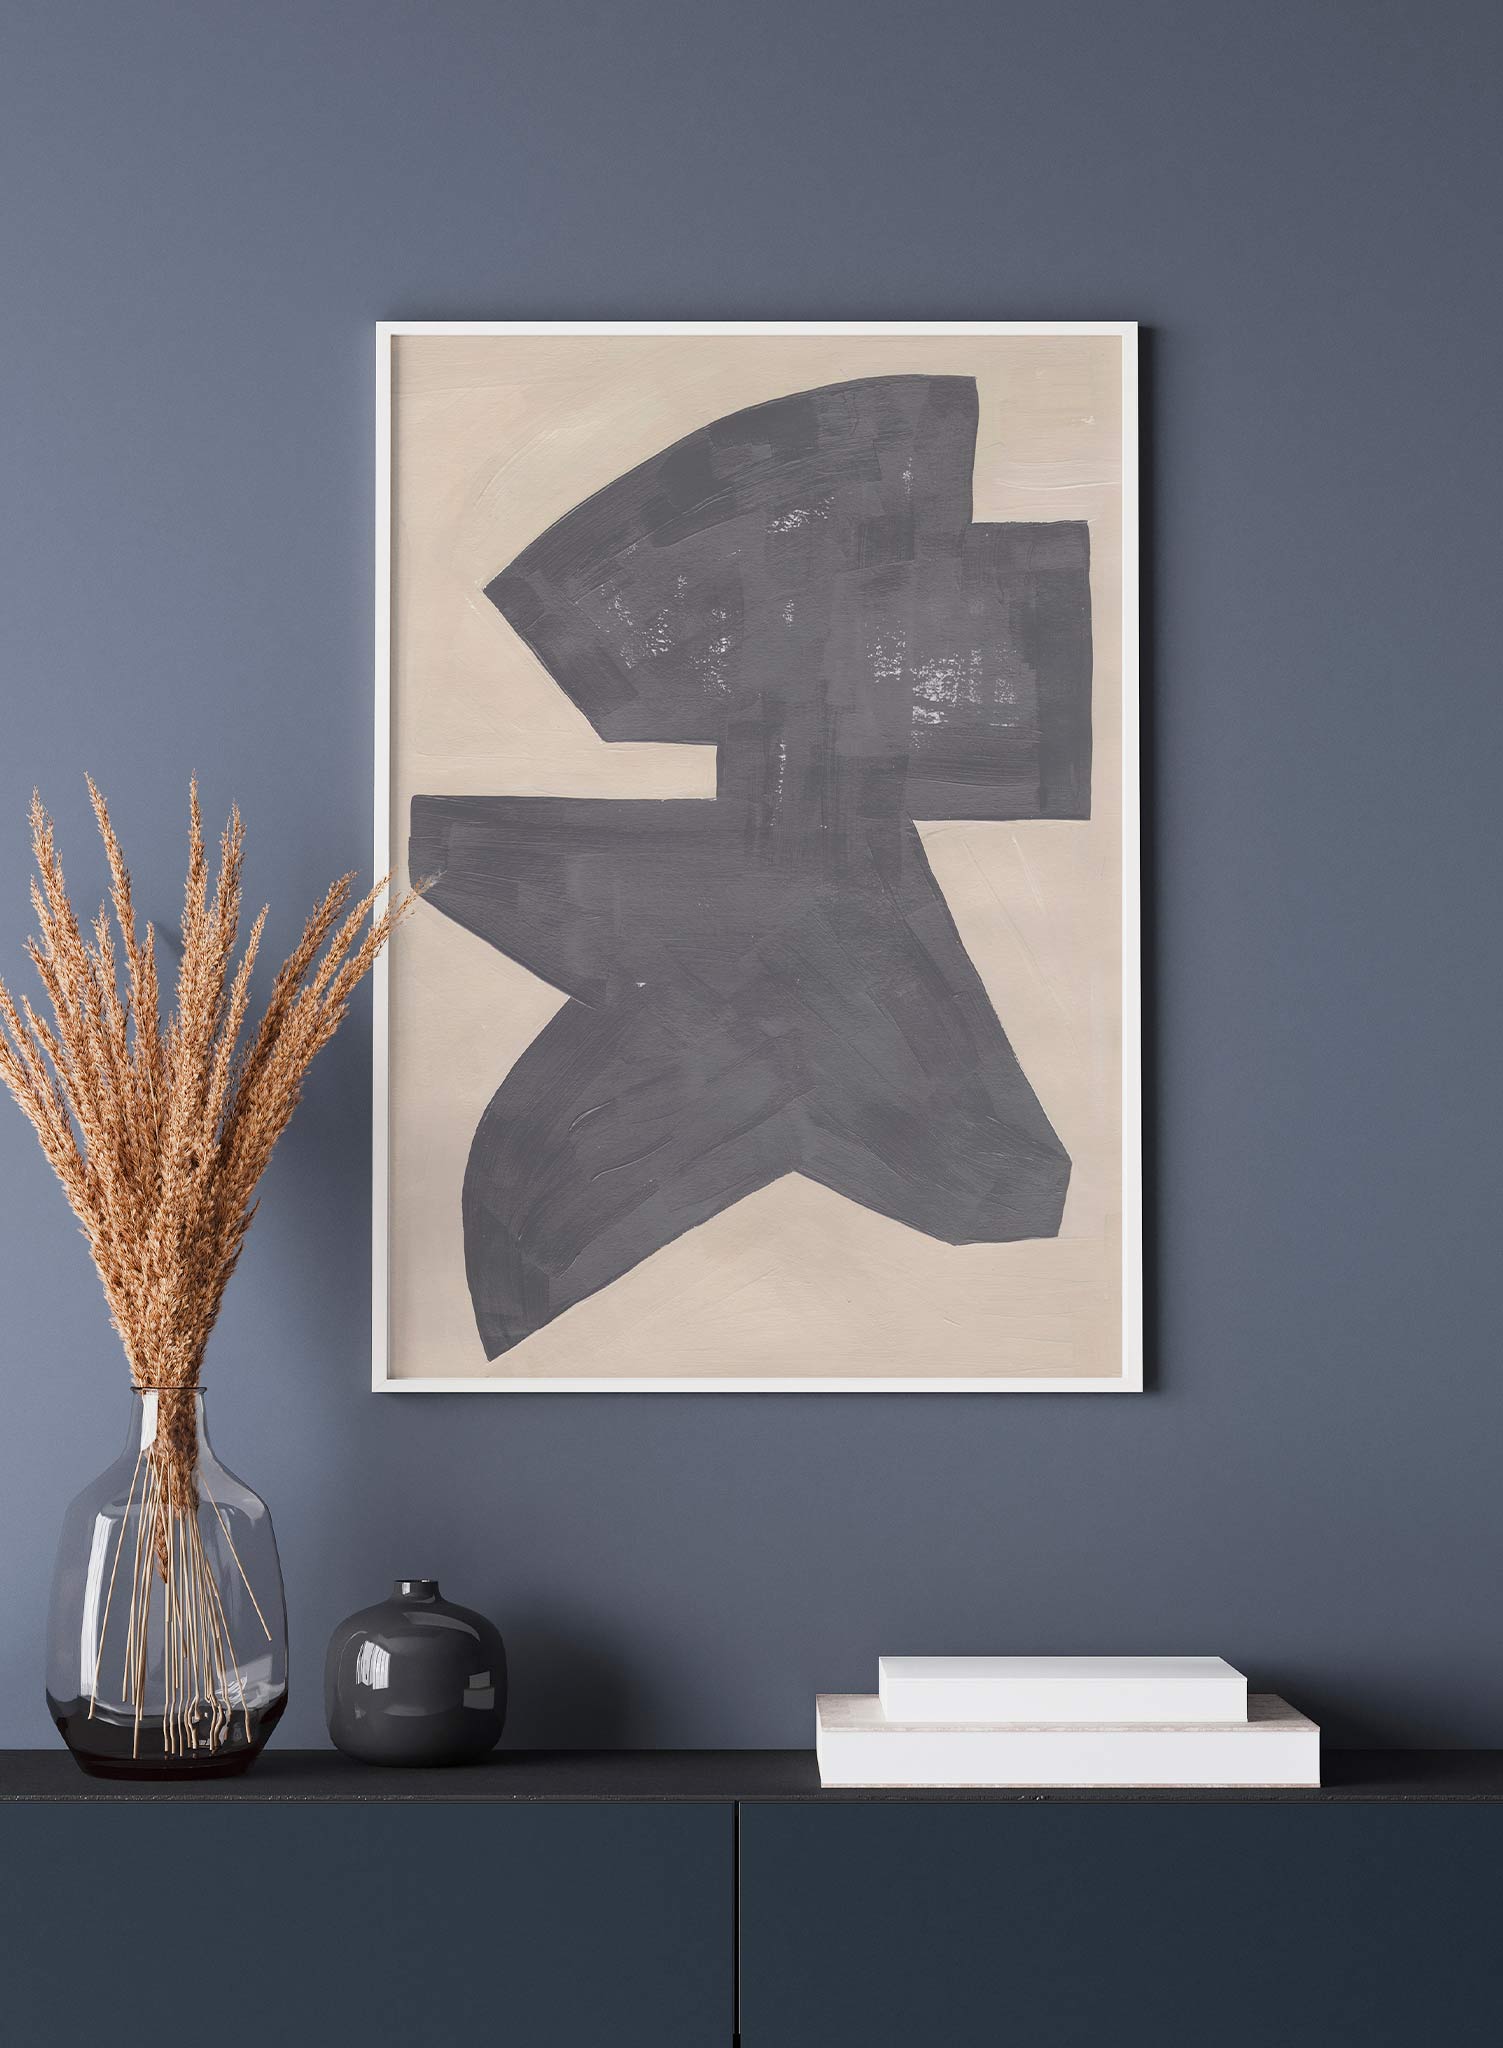 Sculpted Steel is a minimalist abstract illustration of a big and special gray shape by Opposite Wall.